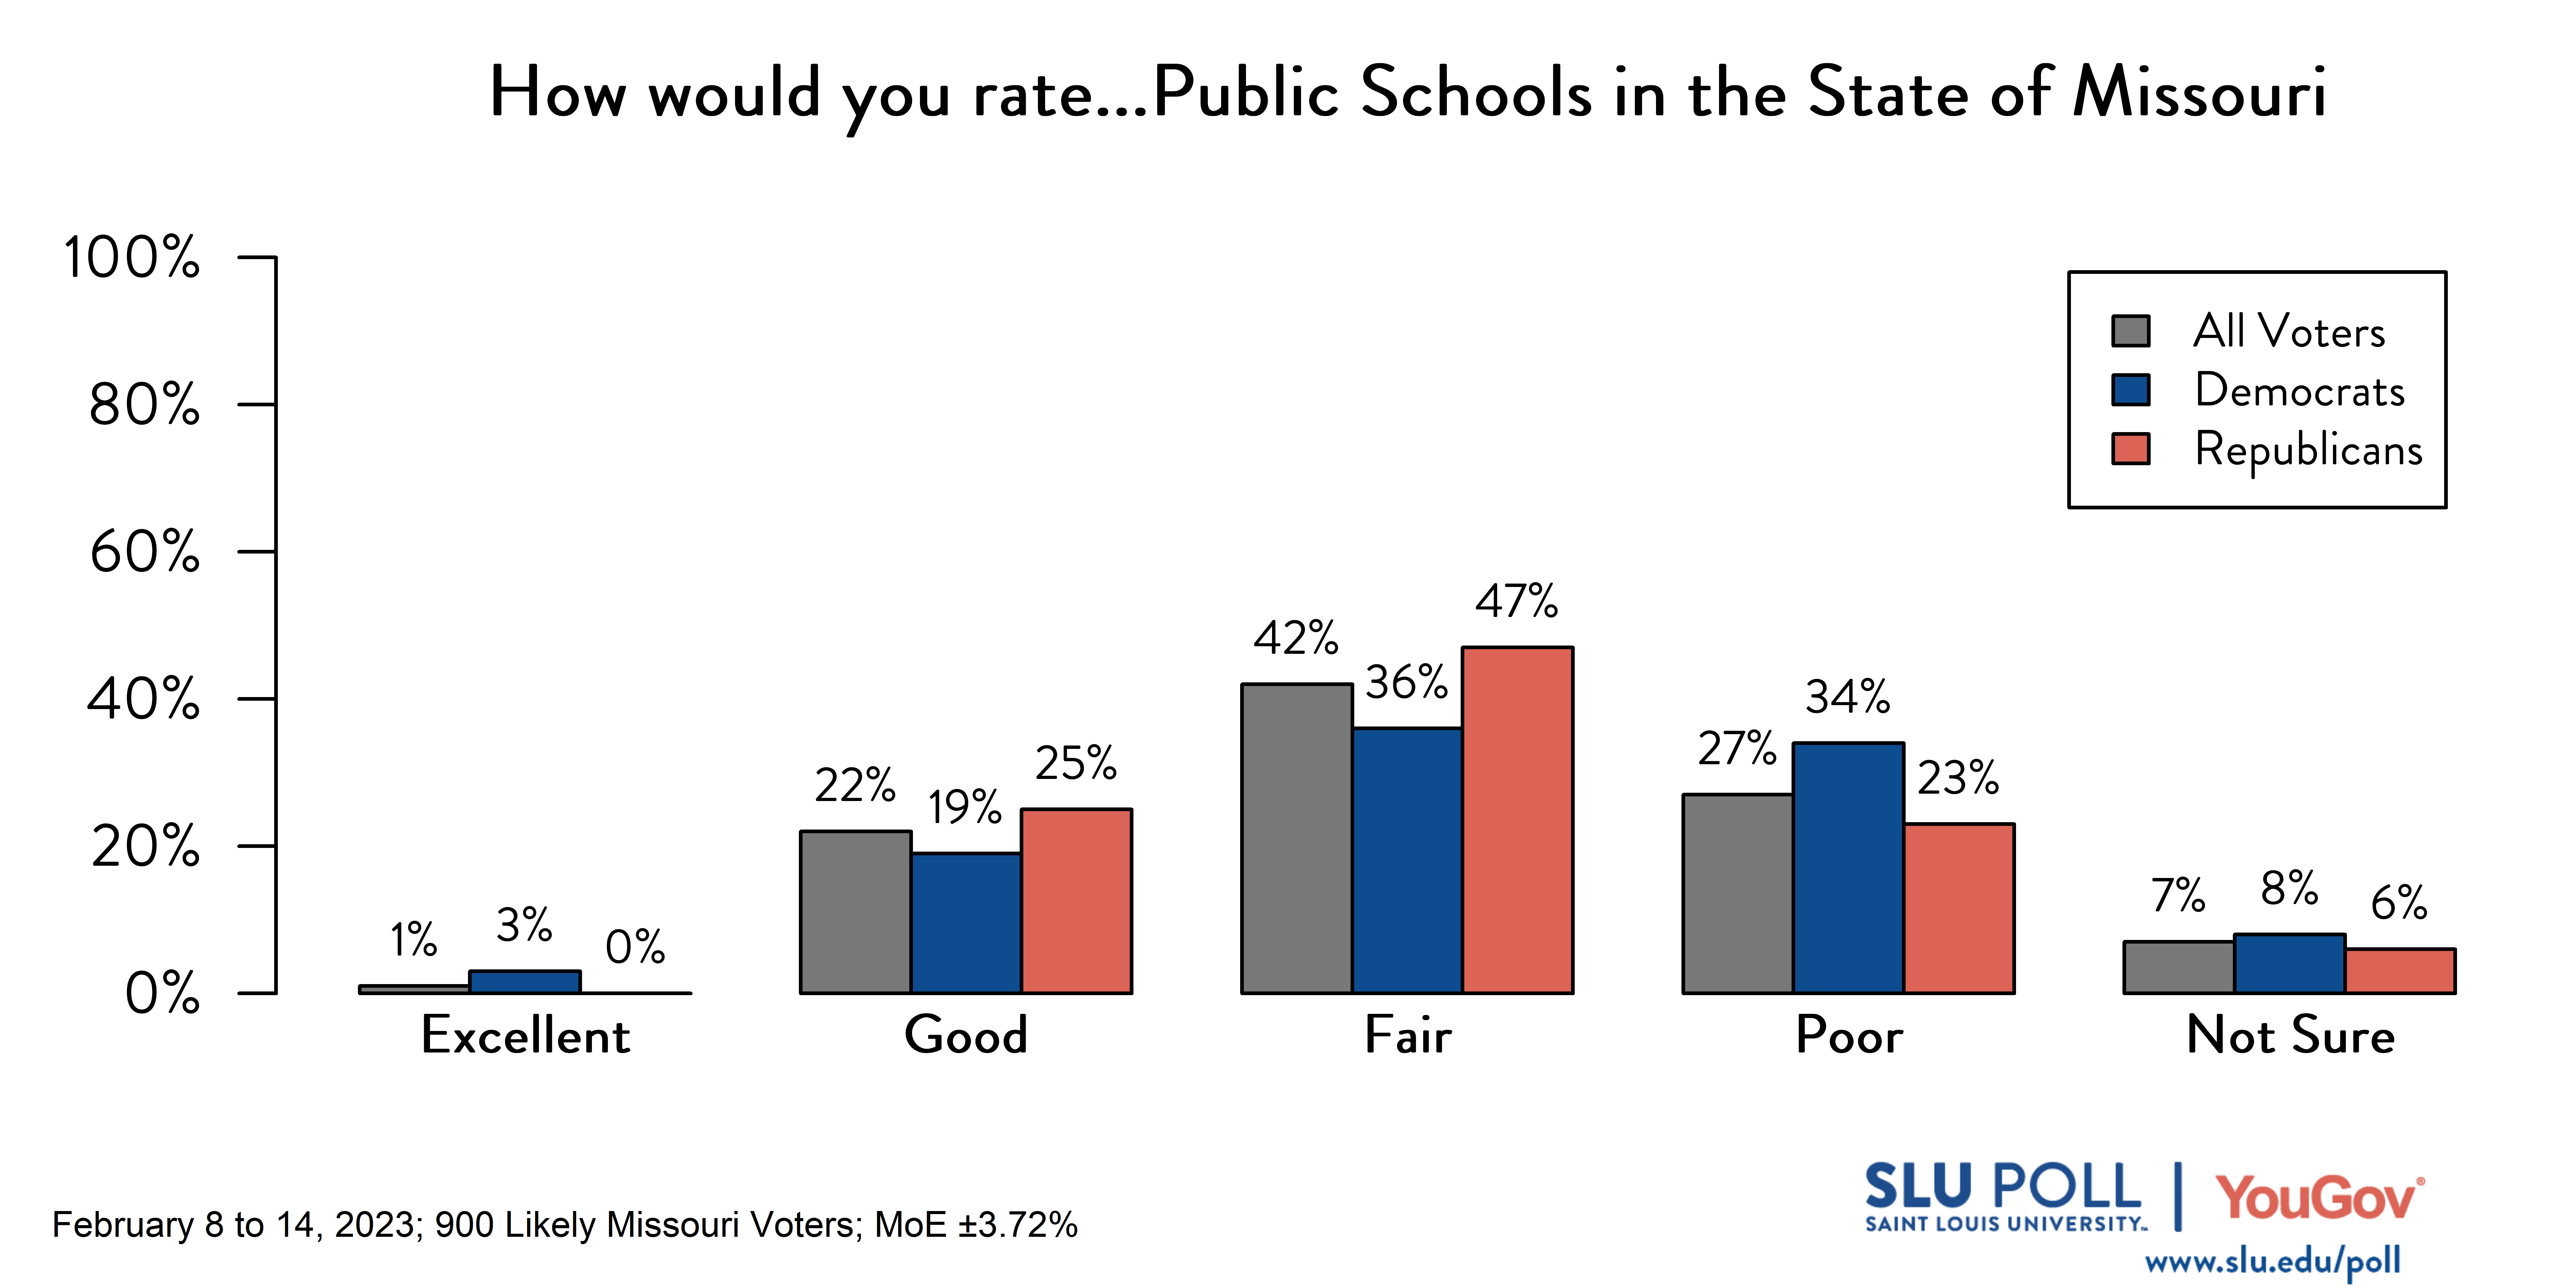 Likely voters' responses to 'How would you rate the condition of the following: Public Schools in the State of Missouri?': 1% Excellent, 22% Good, 42% Fair, 27% Poor, and 7% Not sure. Democratic voters' responses: ' 3% Excellent, 19% Good, 36% Fair, 34% Poor, and 8% Not sure. Republican voters' responses: 0% Excellent, 25% Good, 47% Fair, 23% Poor, and 6% Not sure.